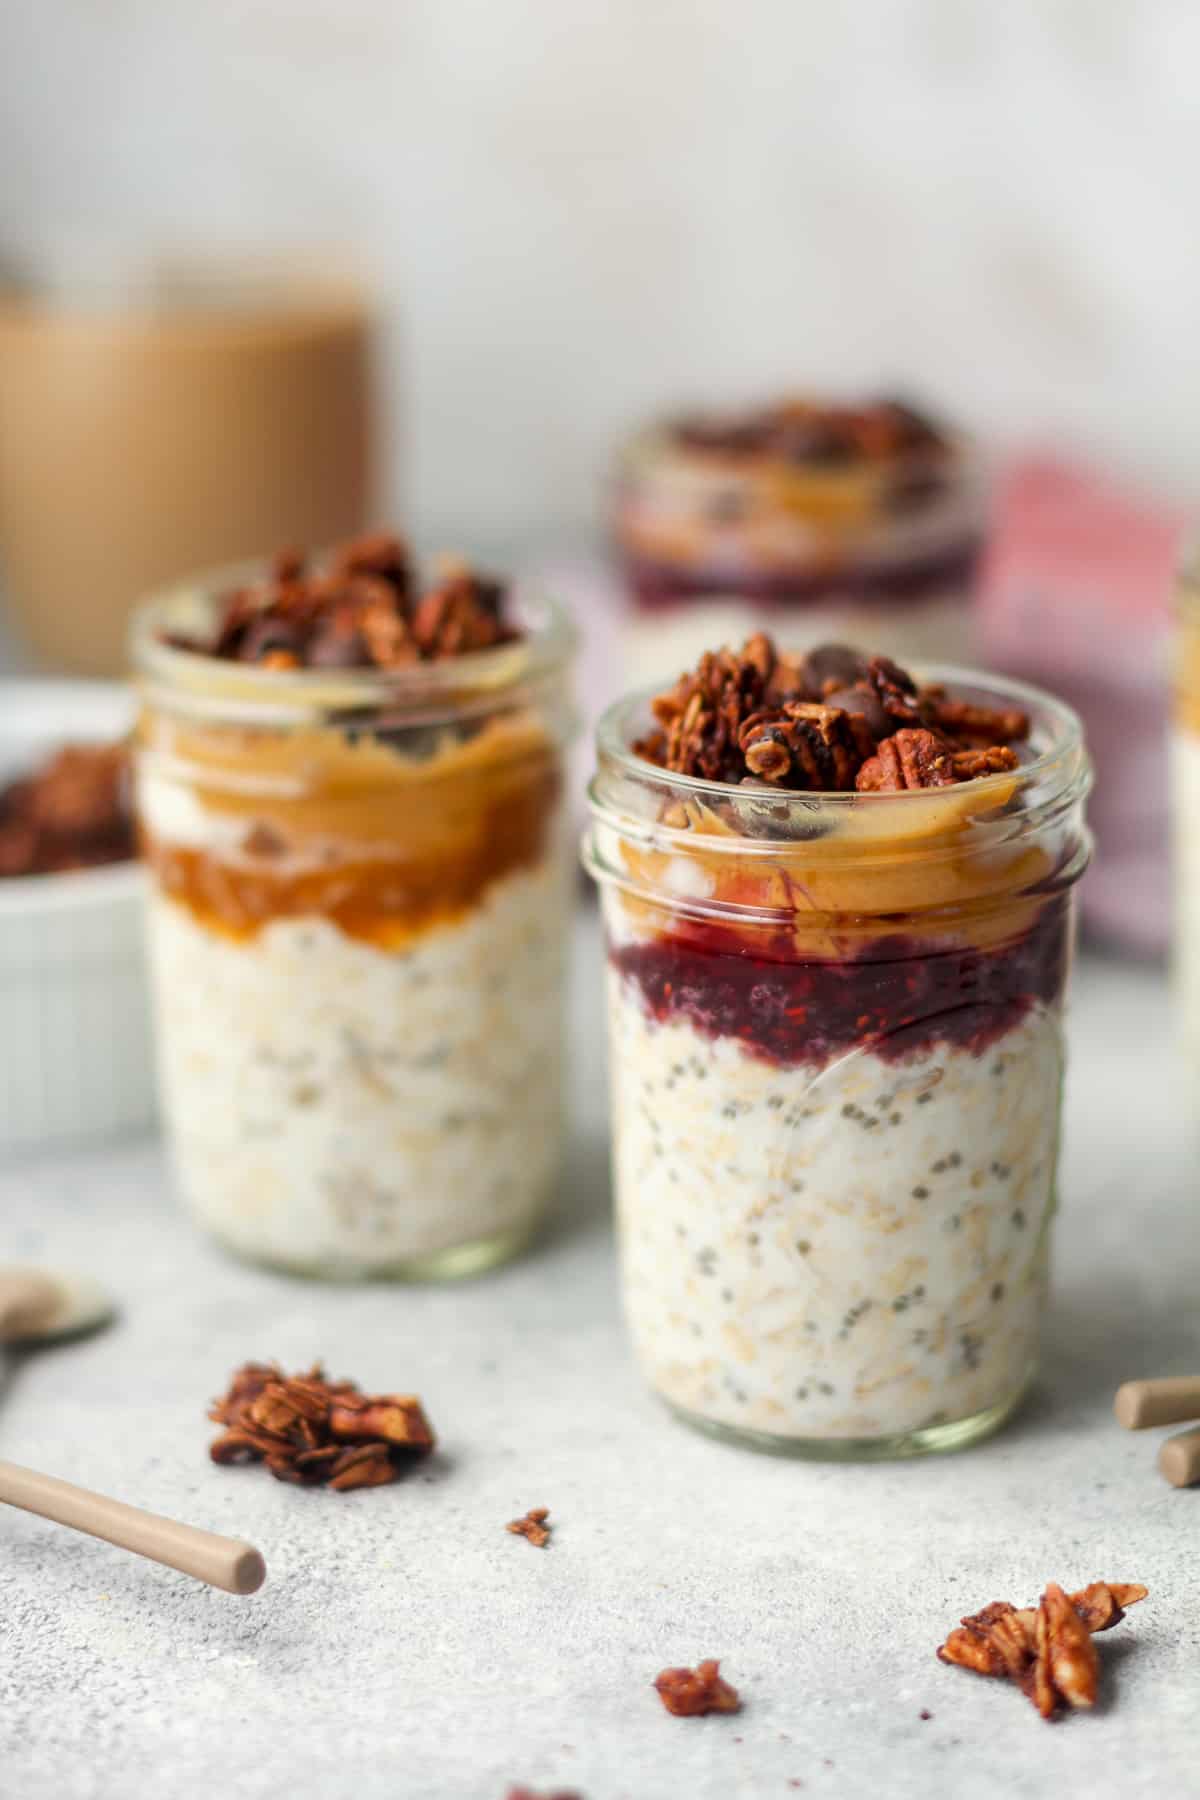 Side view of jars of overnight oats.